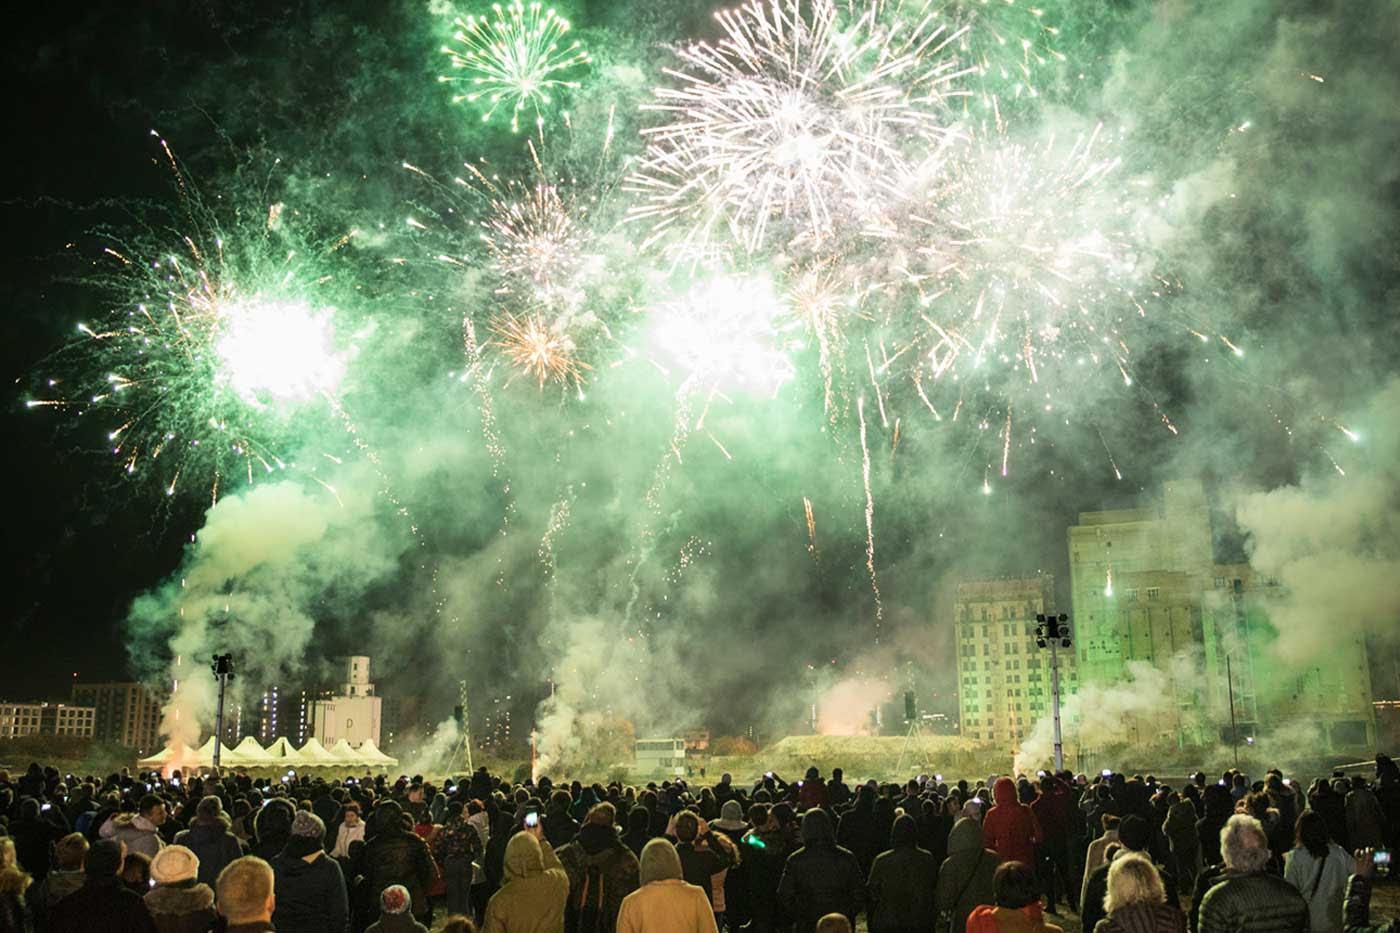 Bright green and white fireworks exploding over a large onlooking crowd